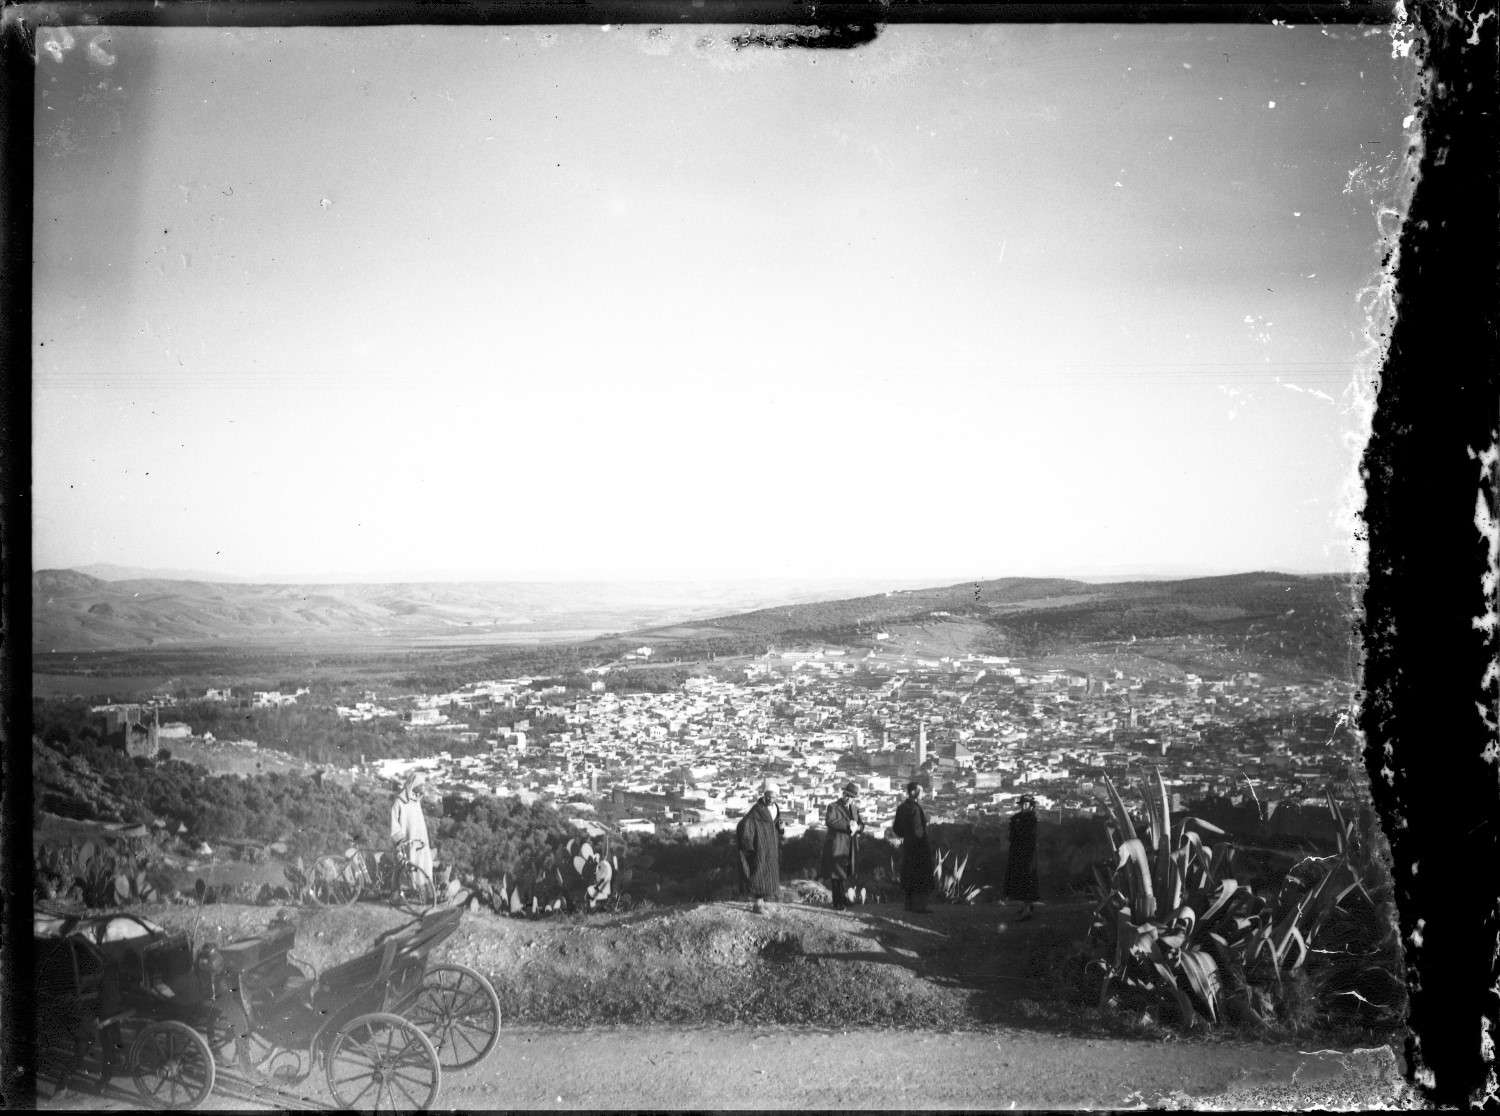 People overlooking the city of Fes, with a carriage in the lower left corner